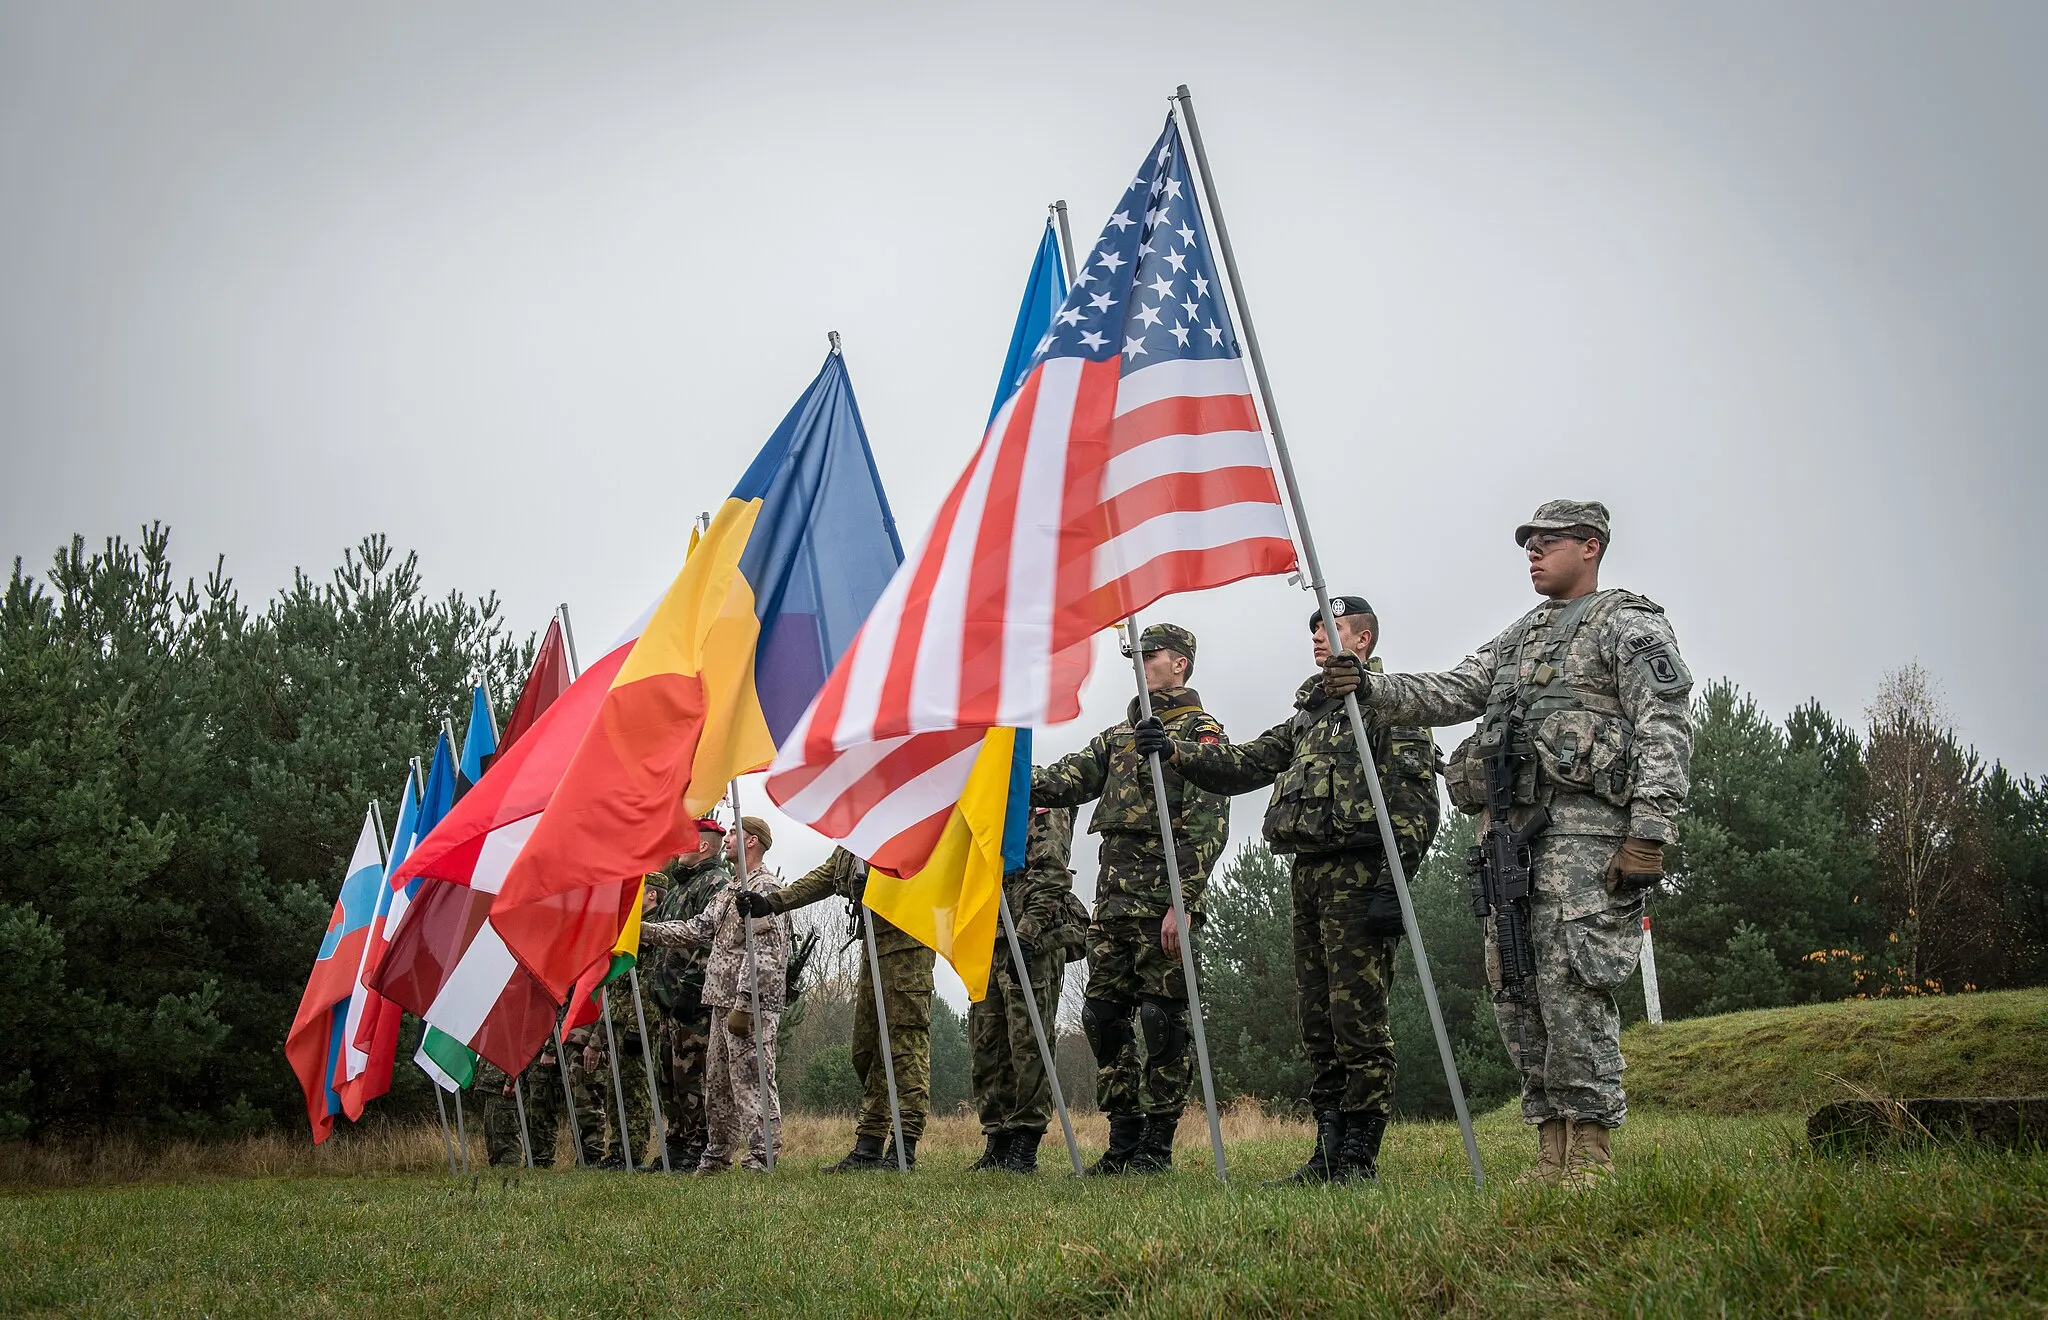 Photo showing: The Opening Ceremony for Ex STEADFAST JAZZ took place on the Drawsko Pomorskie Training Area, Poland, on Nov. 3, 2013.
Exercise Steadfast Jazz 2013 is taking place from 1-9 November in a number of Alliance nations including the Baltic States and Poland.  The purpose of the exercise is to train and test the NATO Response Force, a highly ready and technologically advanced multinational force made up of land, air, maritime and special forces components that the Alliance can deploy quickly wherever needed.  The Steadfast series of exercises are part of NATO’s efforts to maintain connected and interoperable forces at a high-level of readiness.

(NATO photo/SSgt Ian Houlding GBR Army)